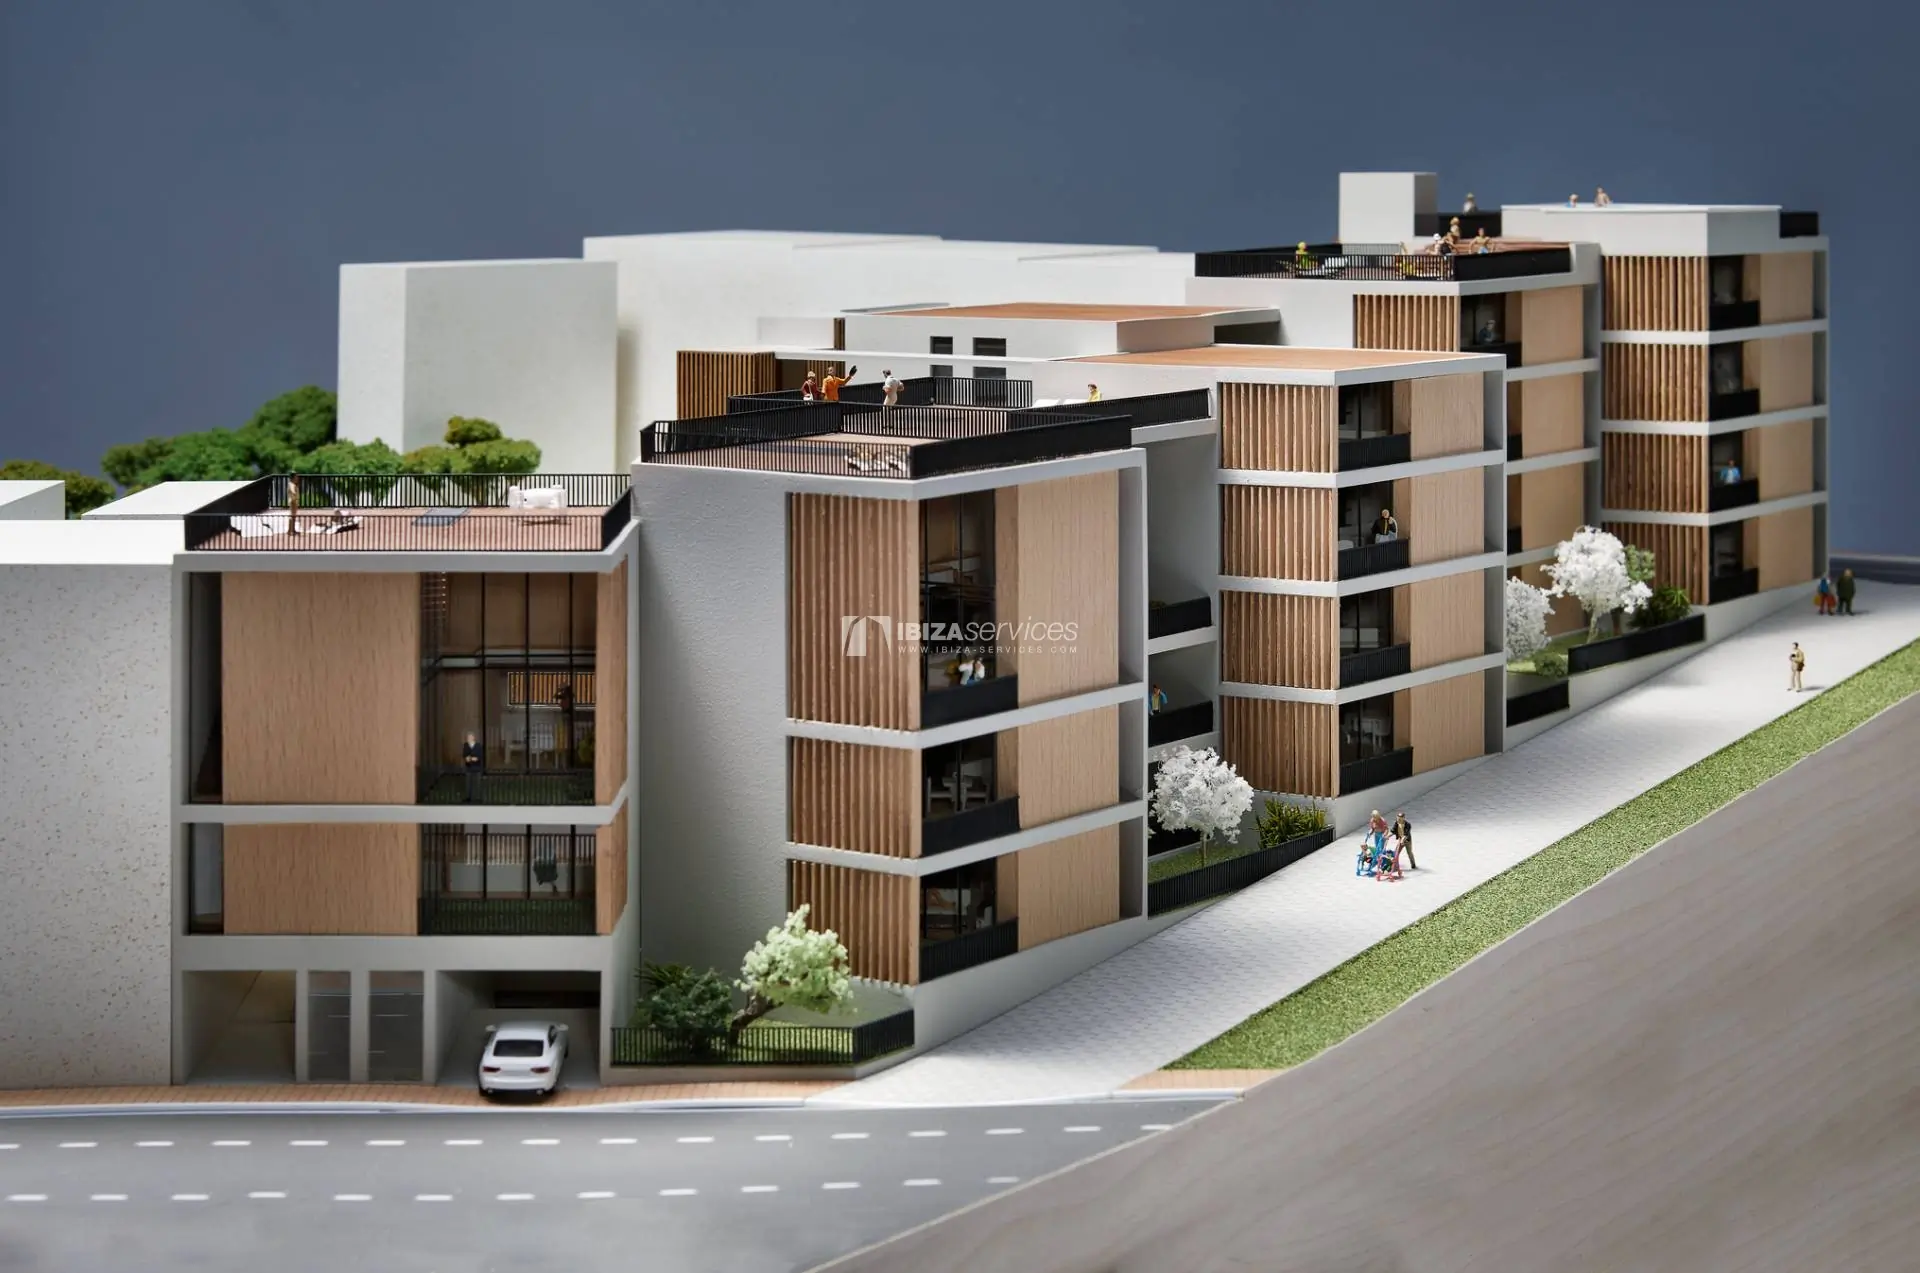 New Build Apartment in the centre of Santa Eulalia to buy